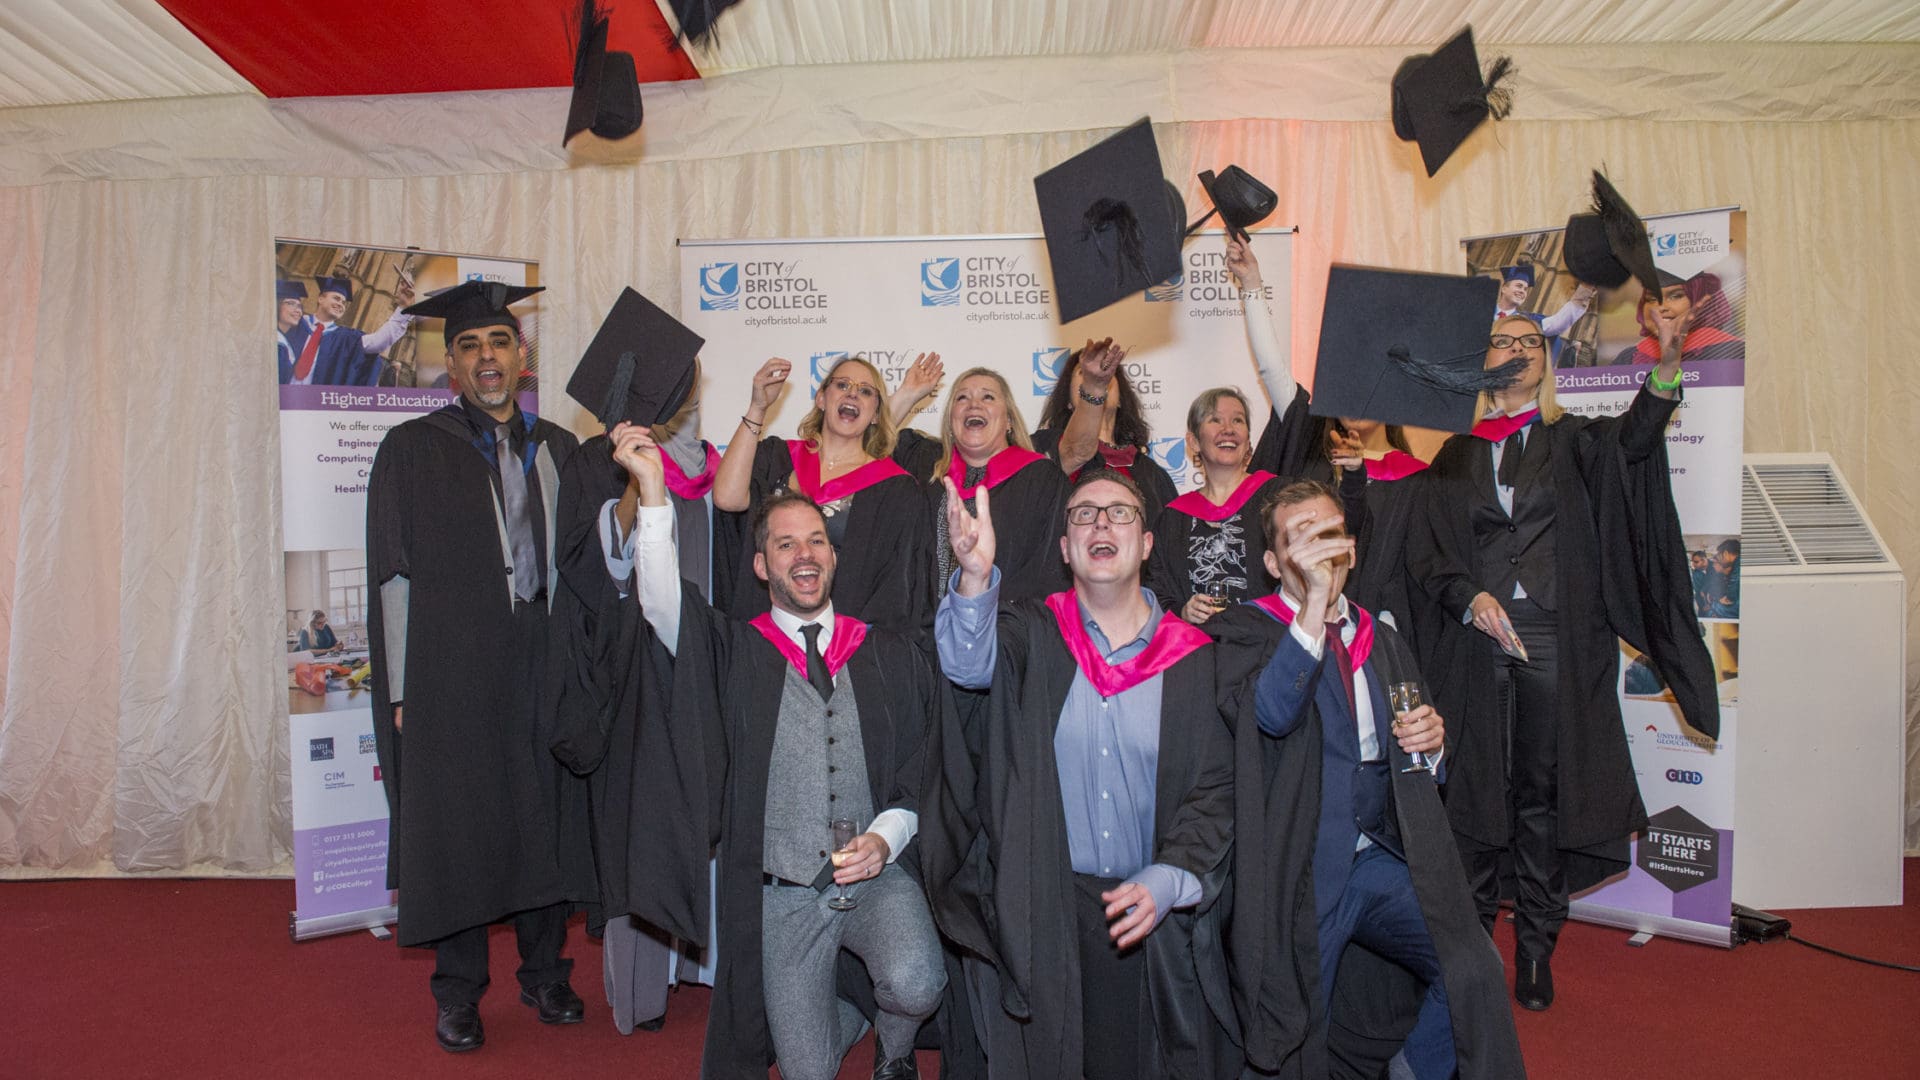 Graduation image of students throwing hats in air